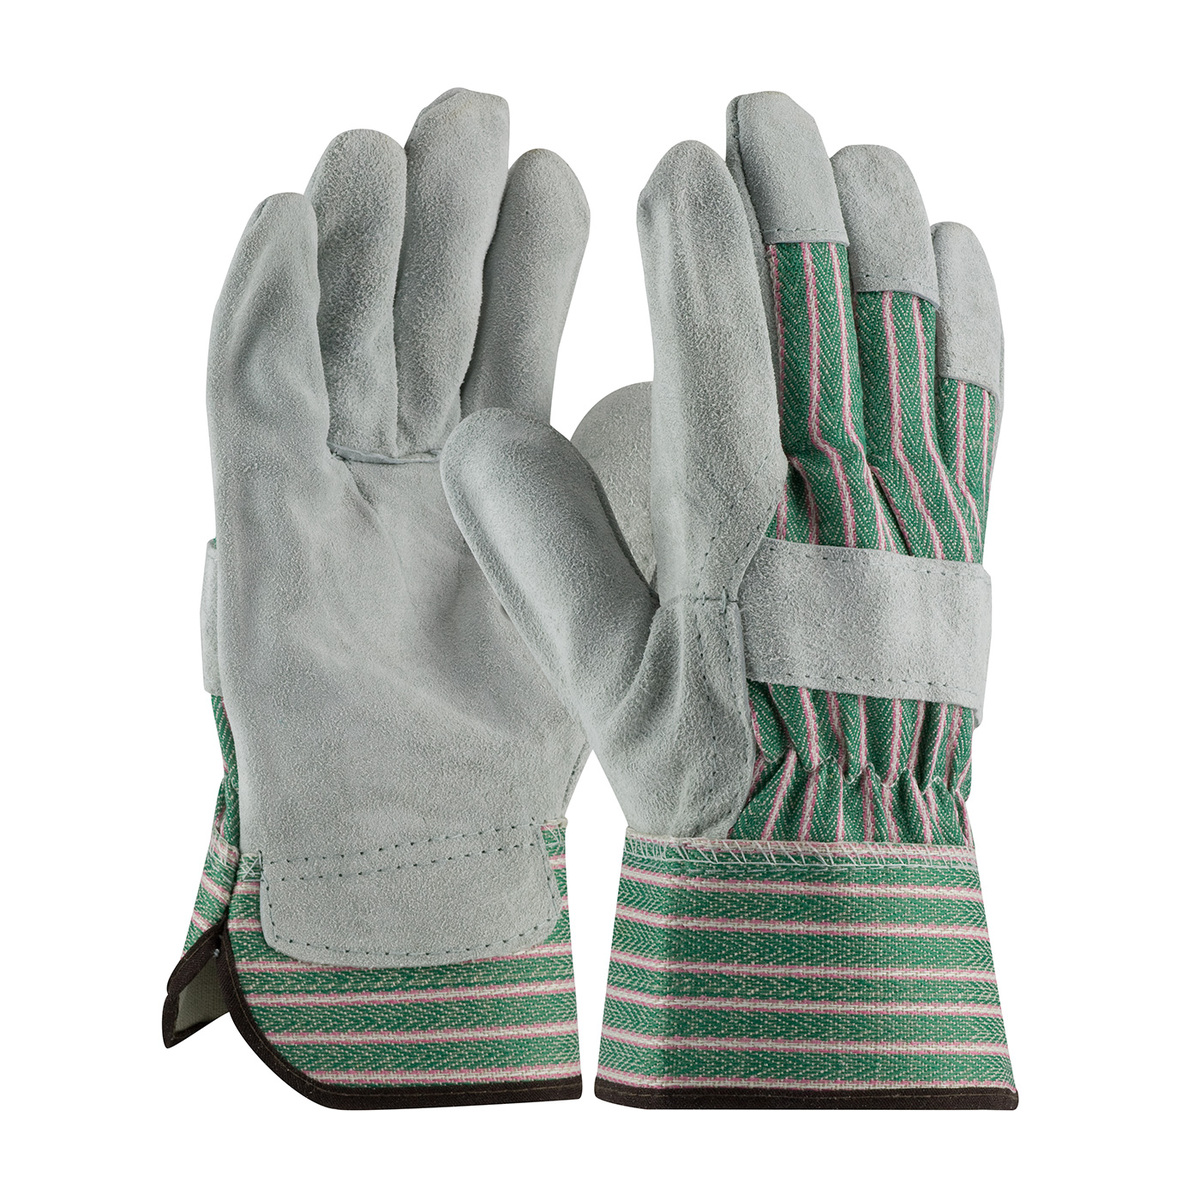 PIP® Small Shoulder Split Leather Palm Gloves With Canvas Back And Rubberized Safety Cuff